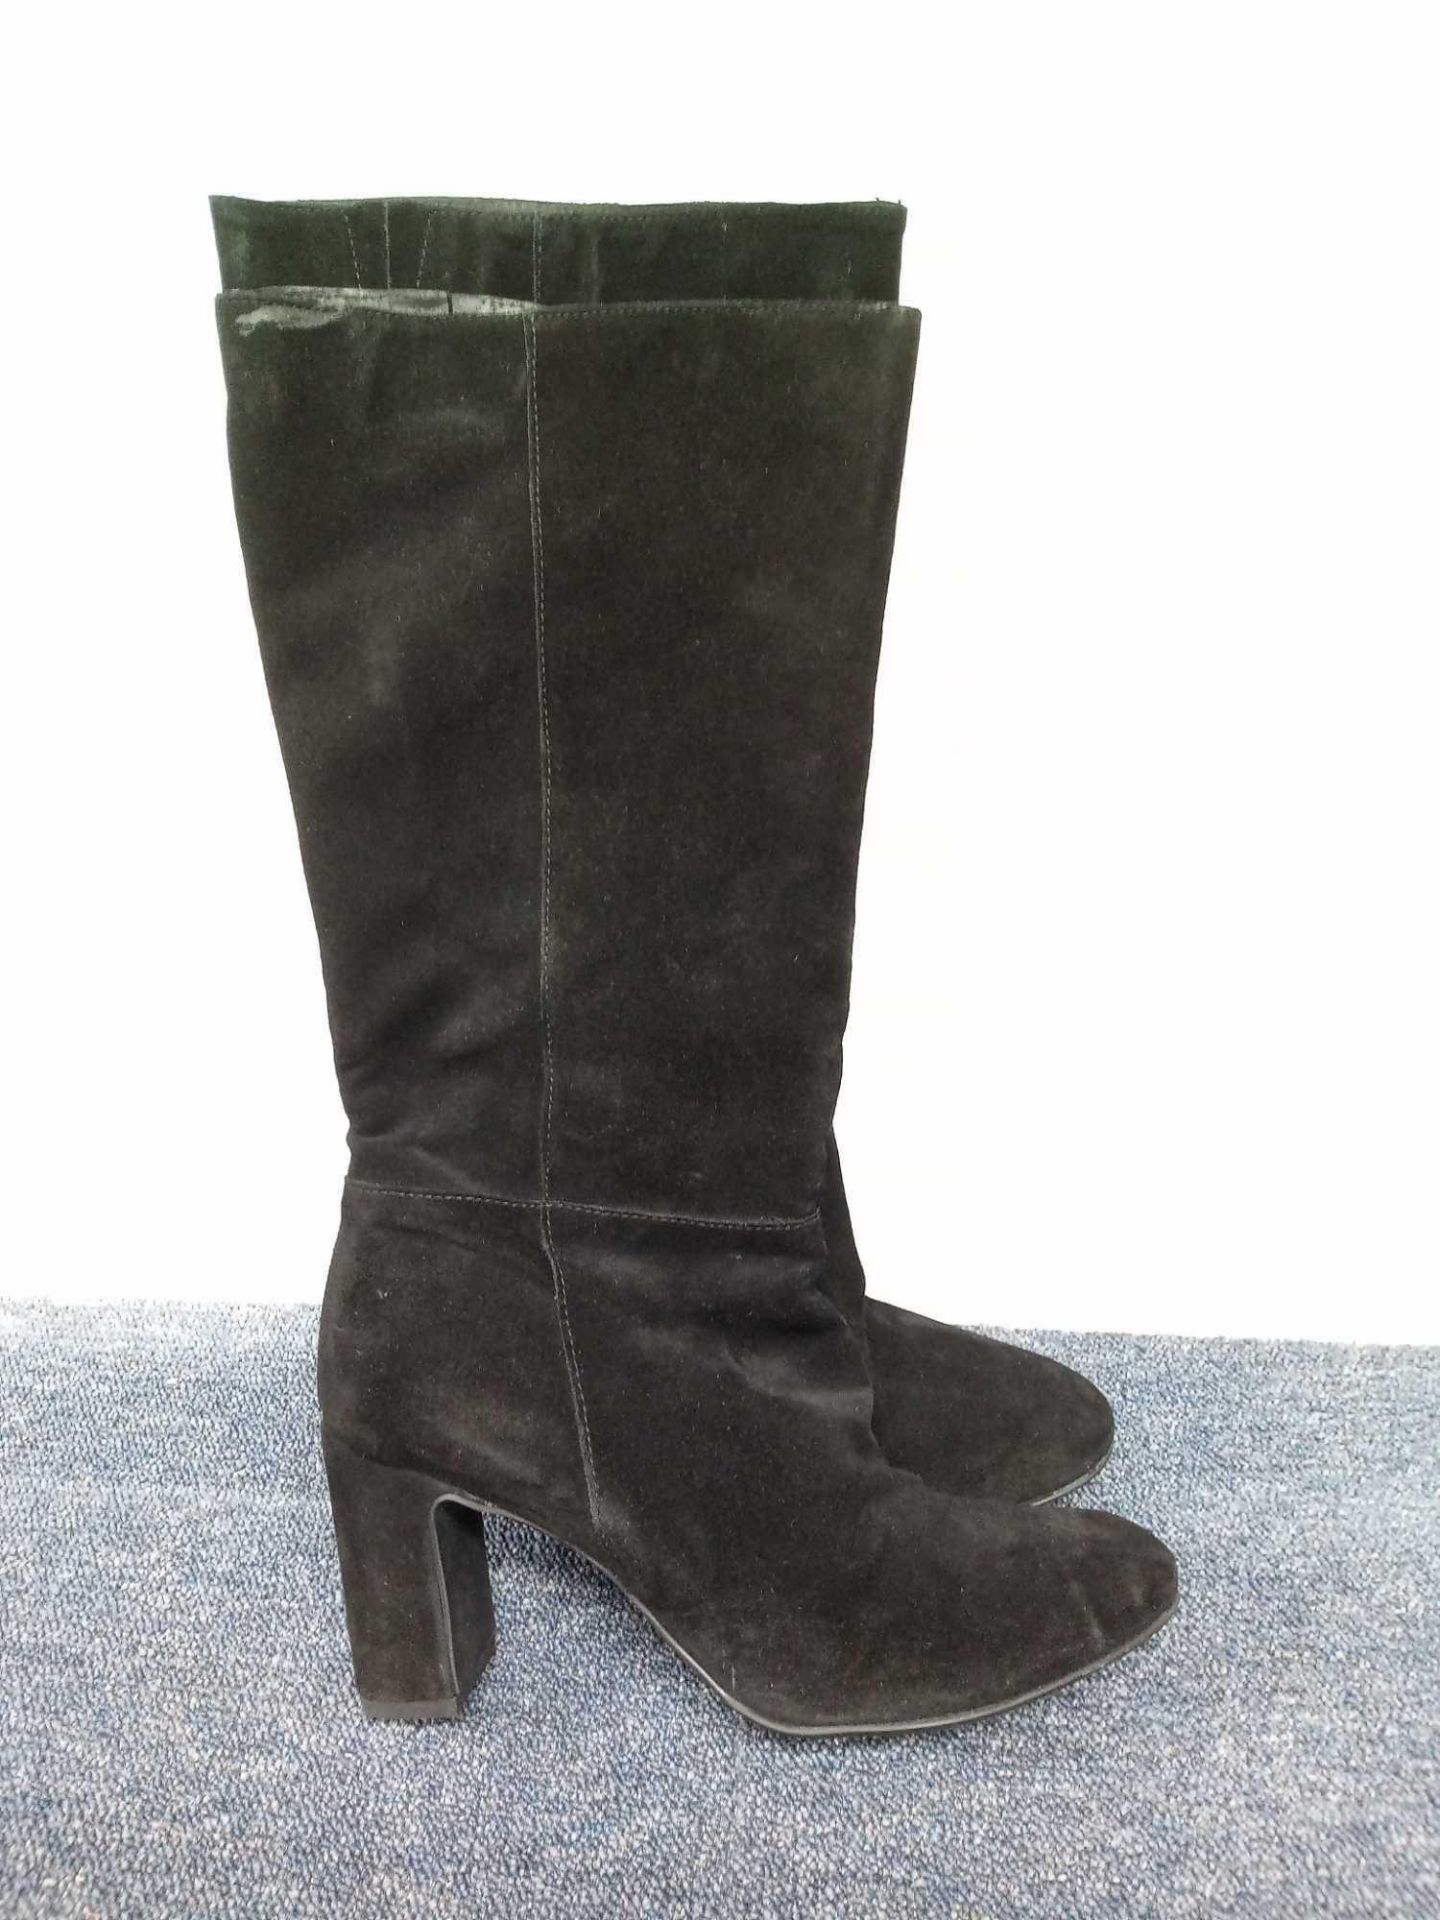 RRP £85 John Lewis Black Suede October Boots Size 6 (00095215)